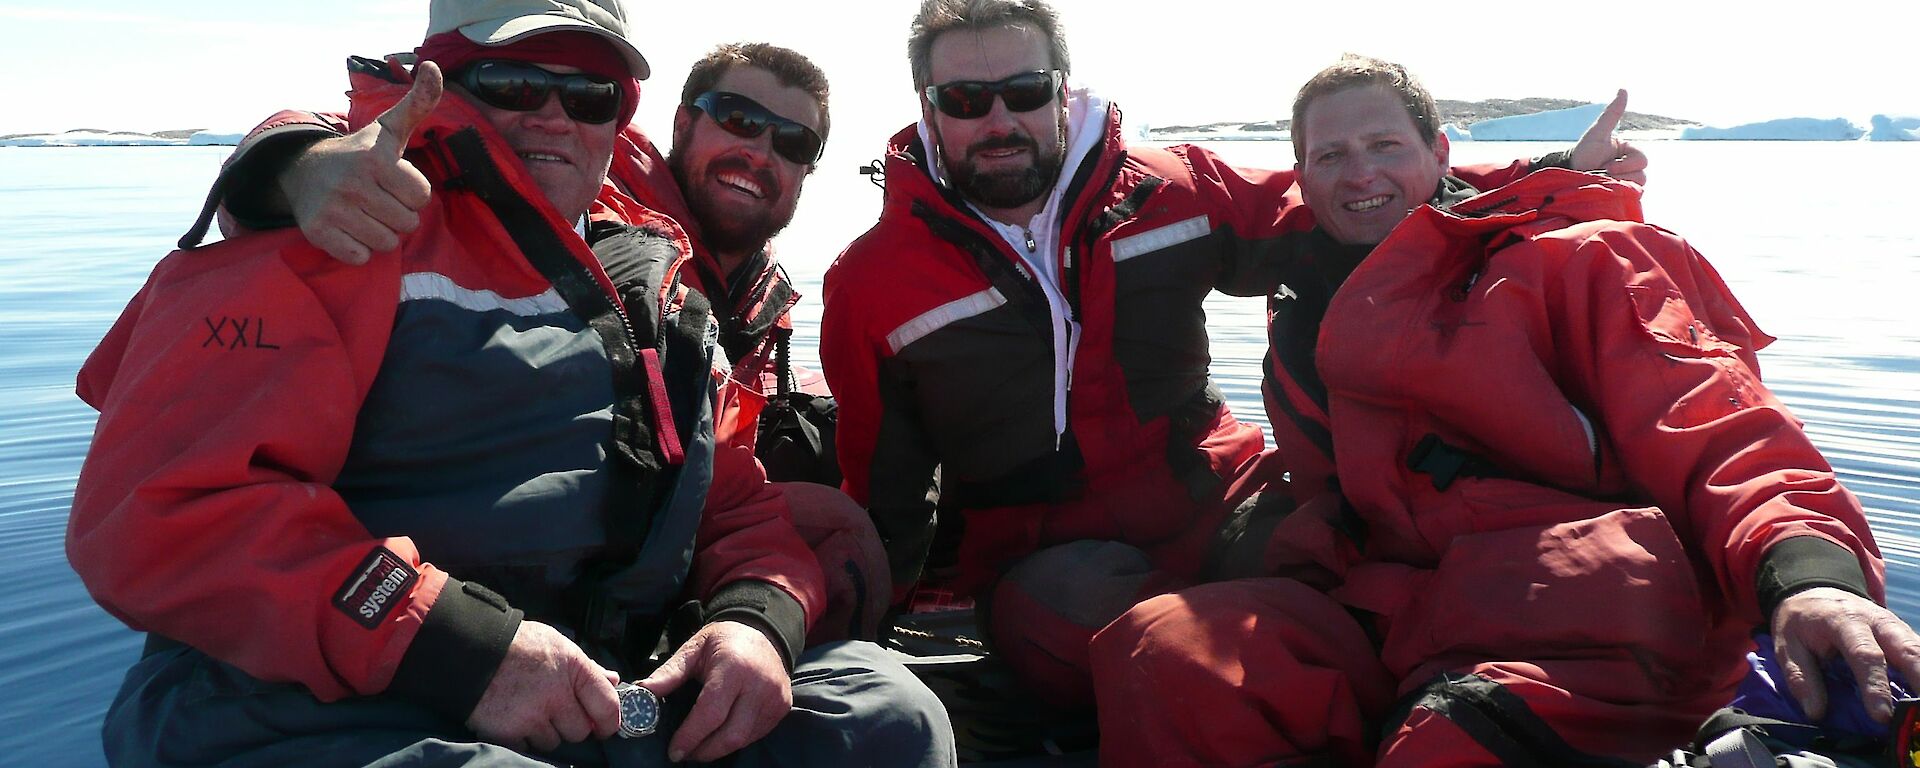 Four expeditioners posing for a photo in a inflatable rubber boat